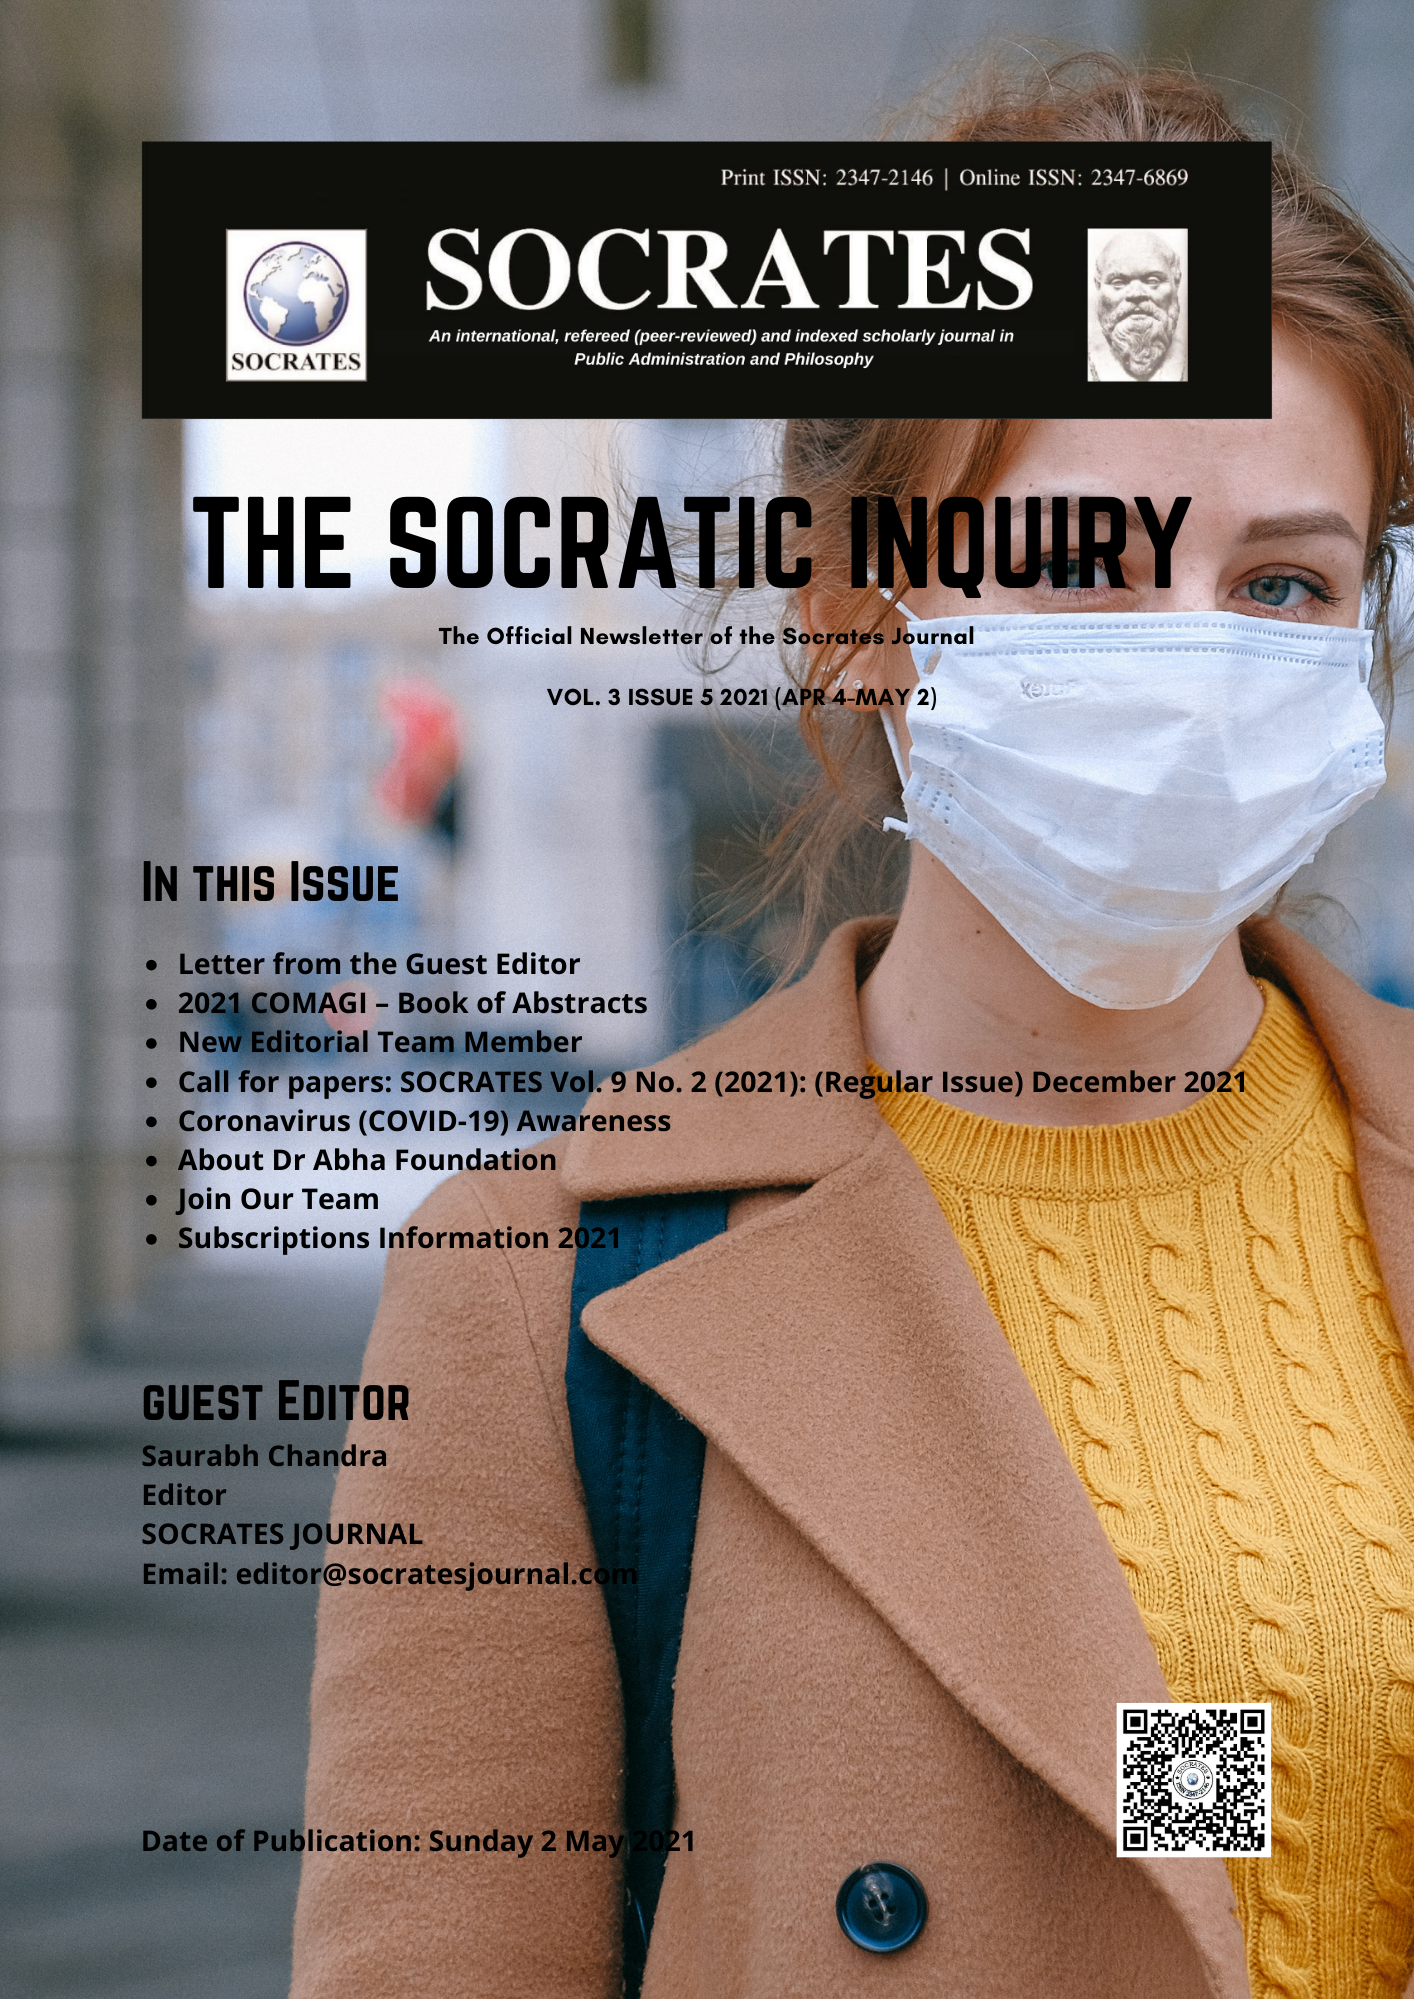 The Socratic Inquiry Newsletter Vol 3 Issue 5 (2021)